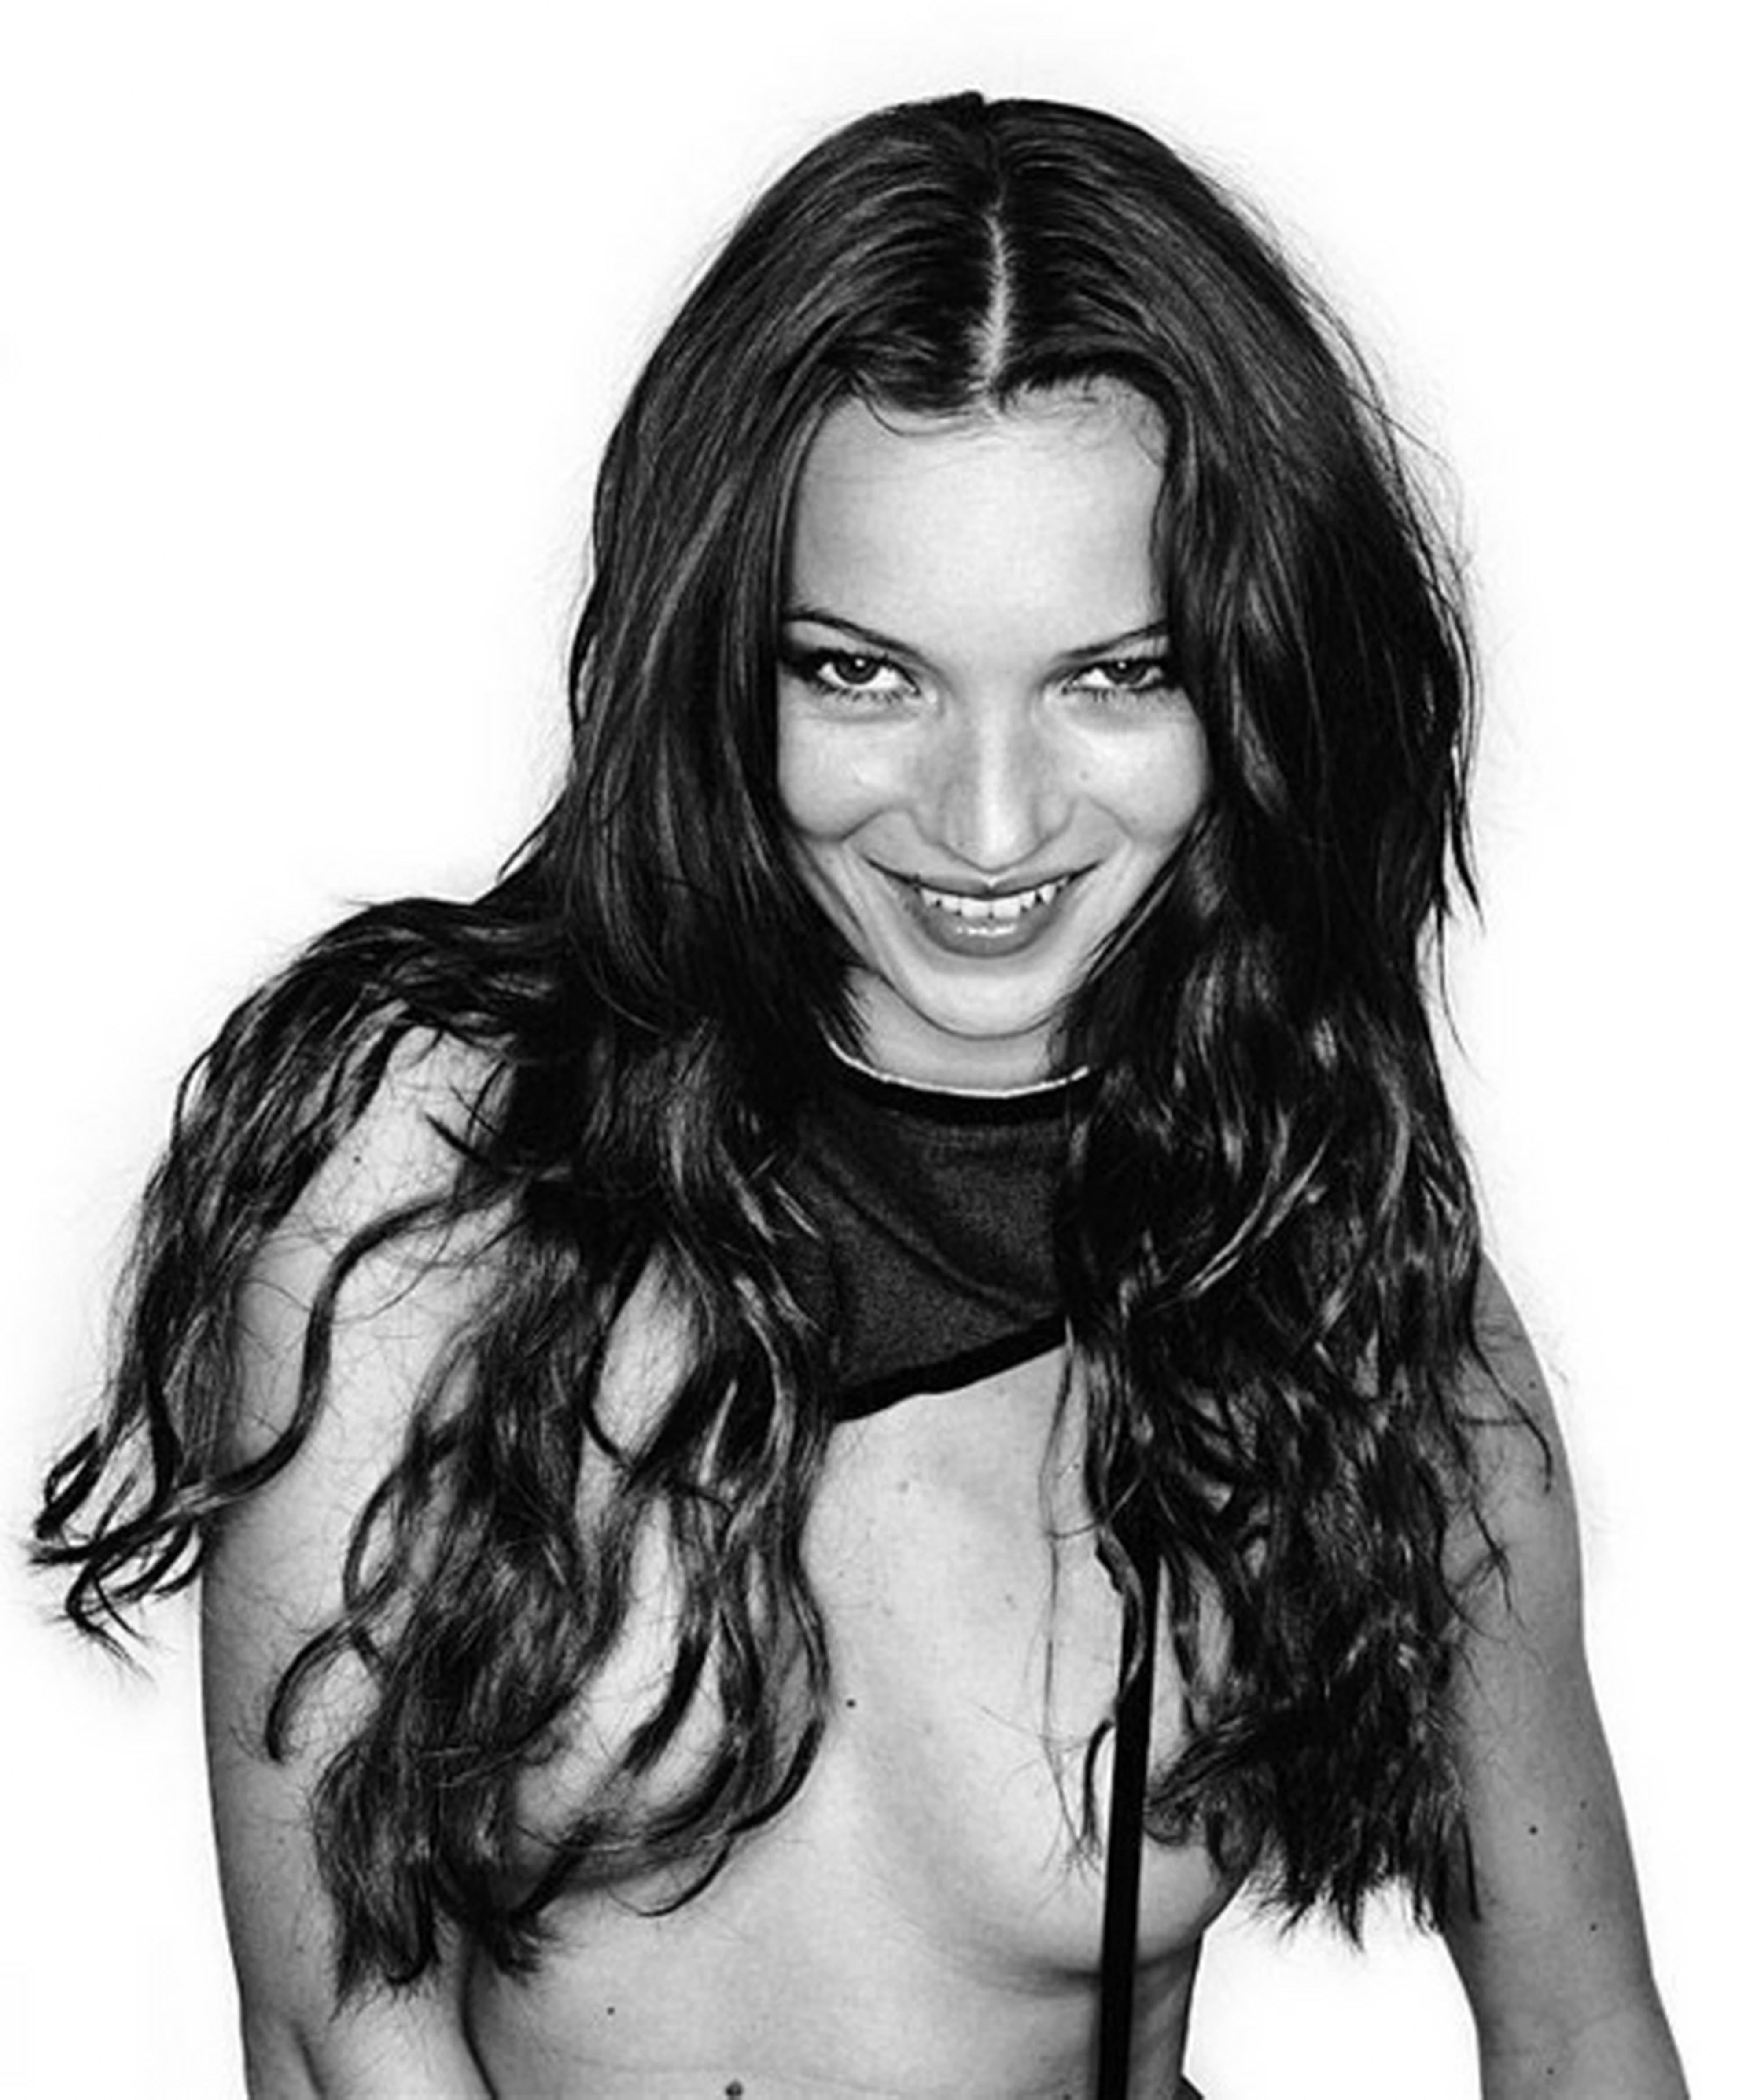 Cheeky Kate - nude portrait of supermodel Kate Moss, fine art photography, 1999